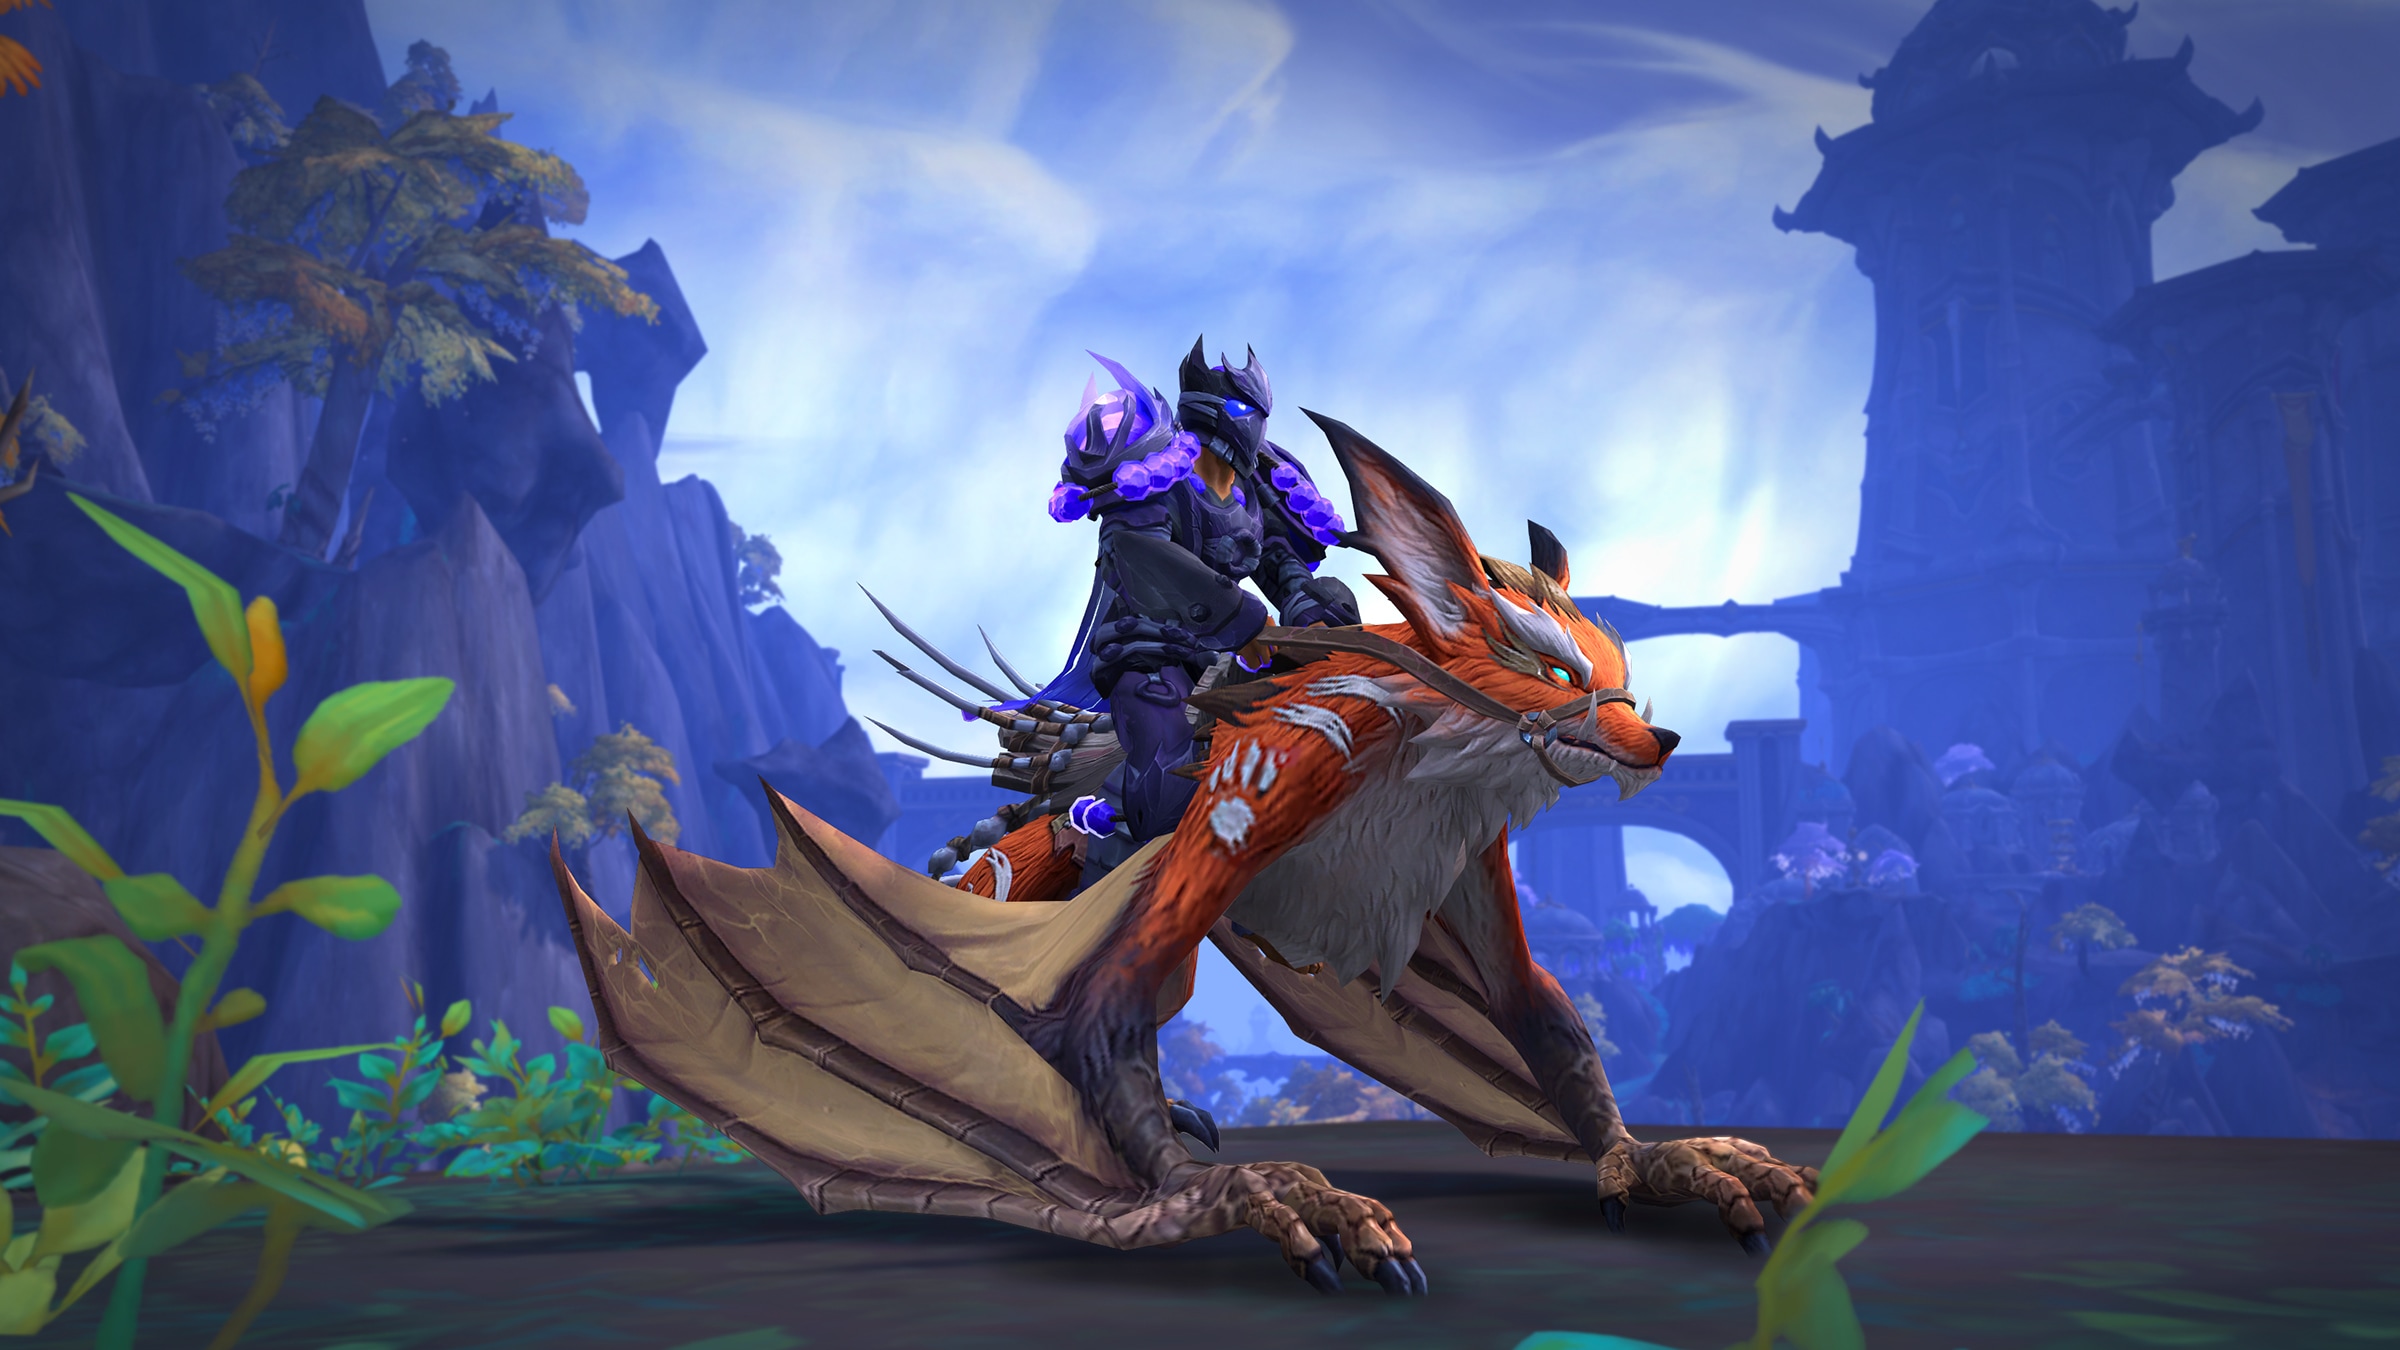 Dragonflight: Mounts, Pets, and More Await in the Dragon Isles